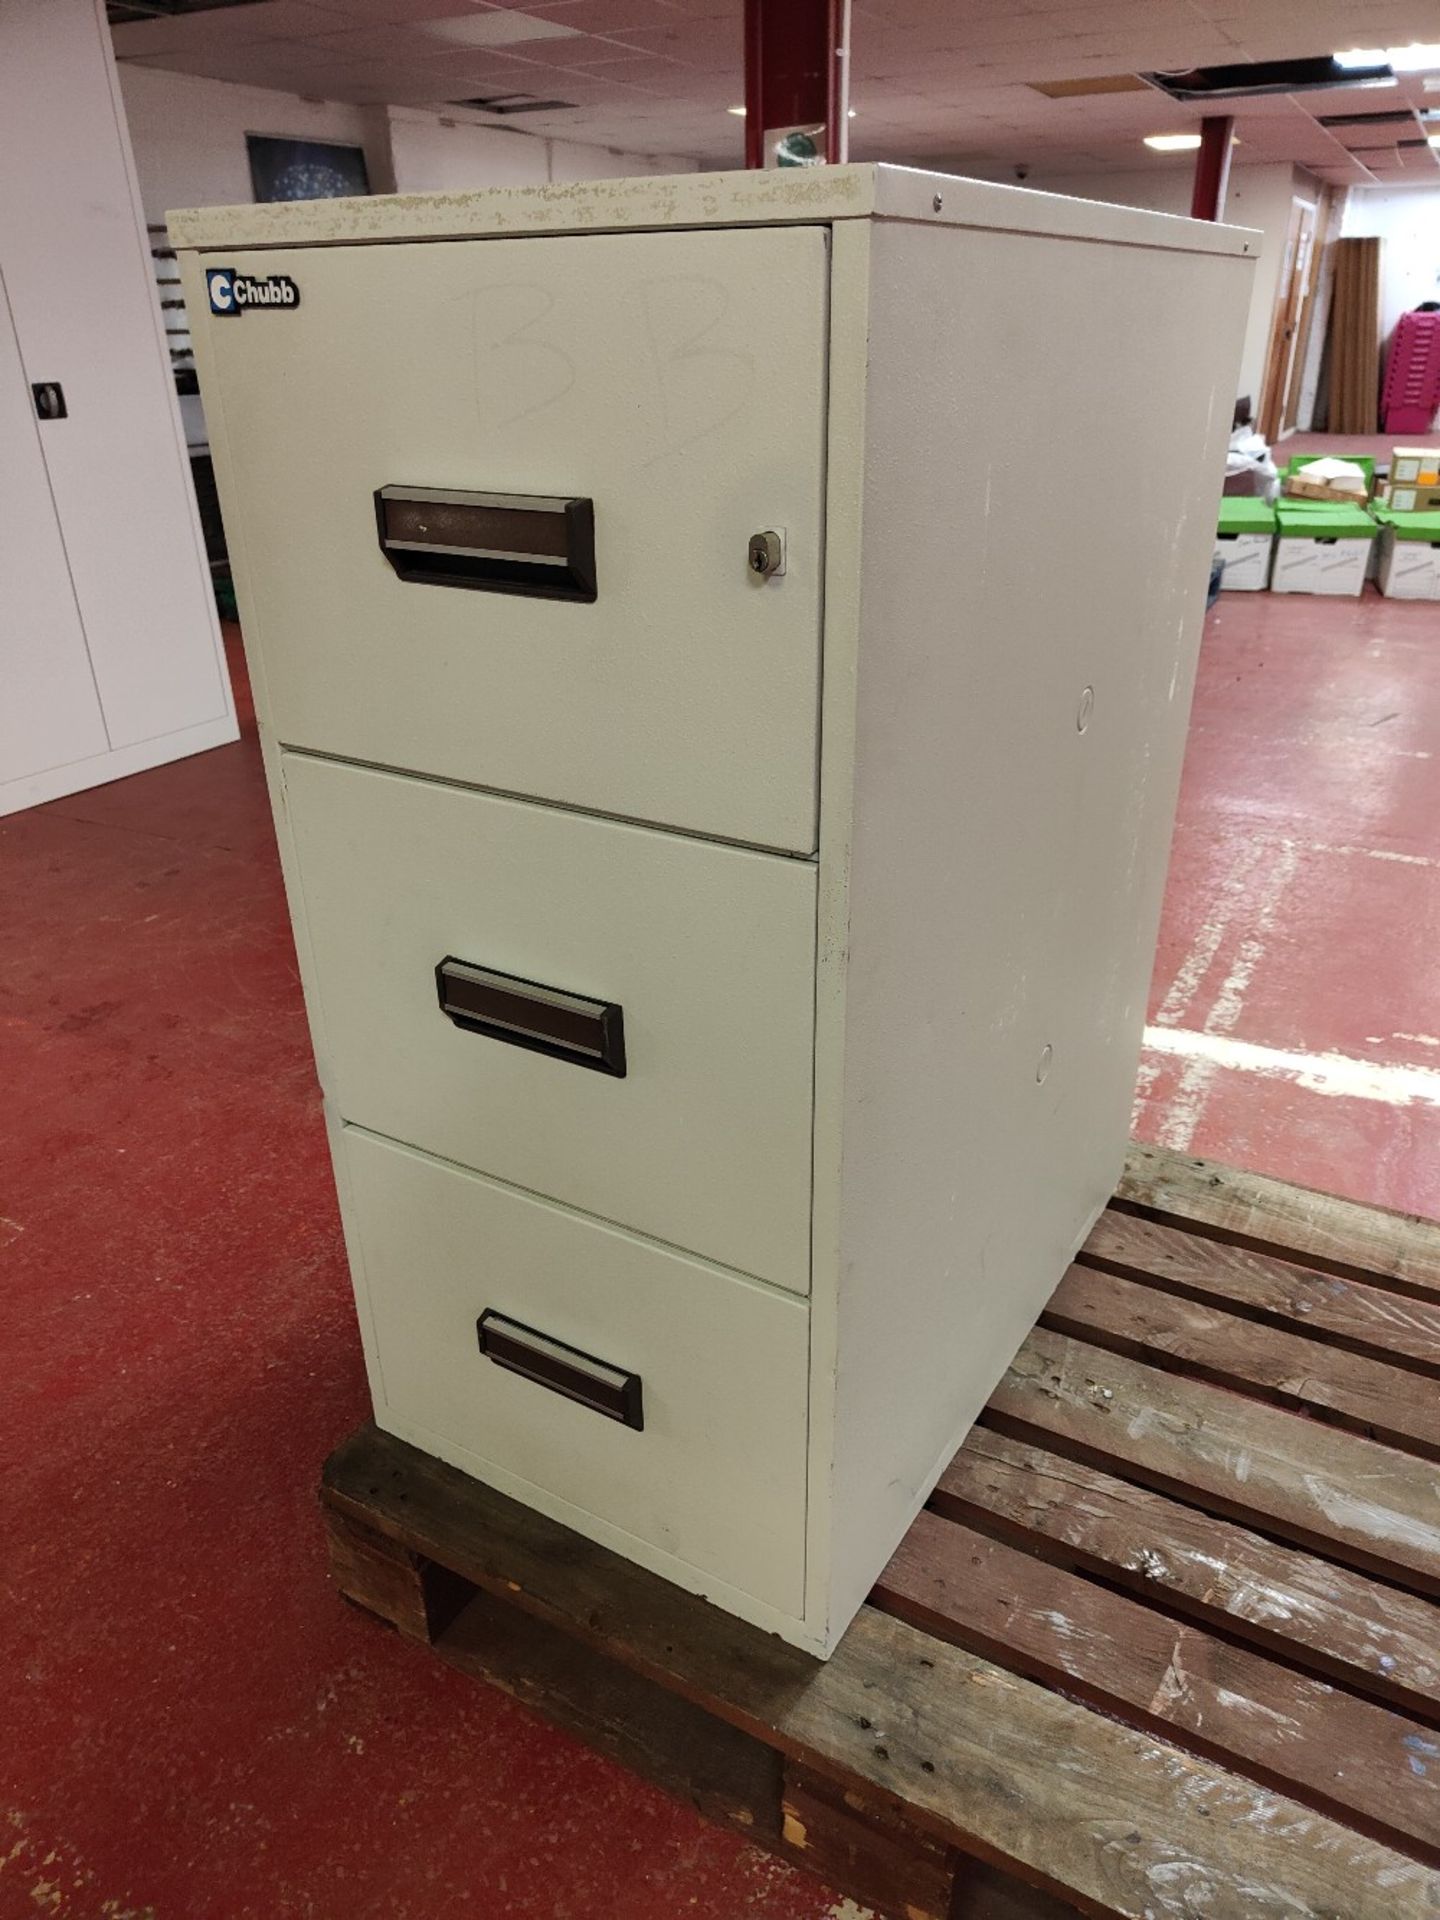 High Security Chubb Metal Filing Cabinet - Image 2 of 3